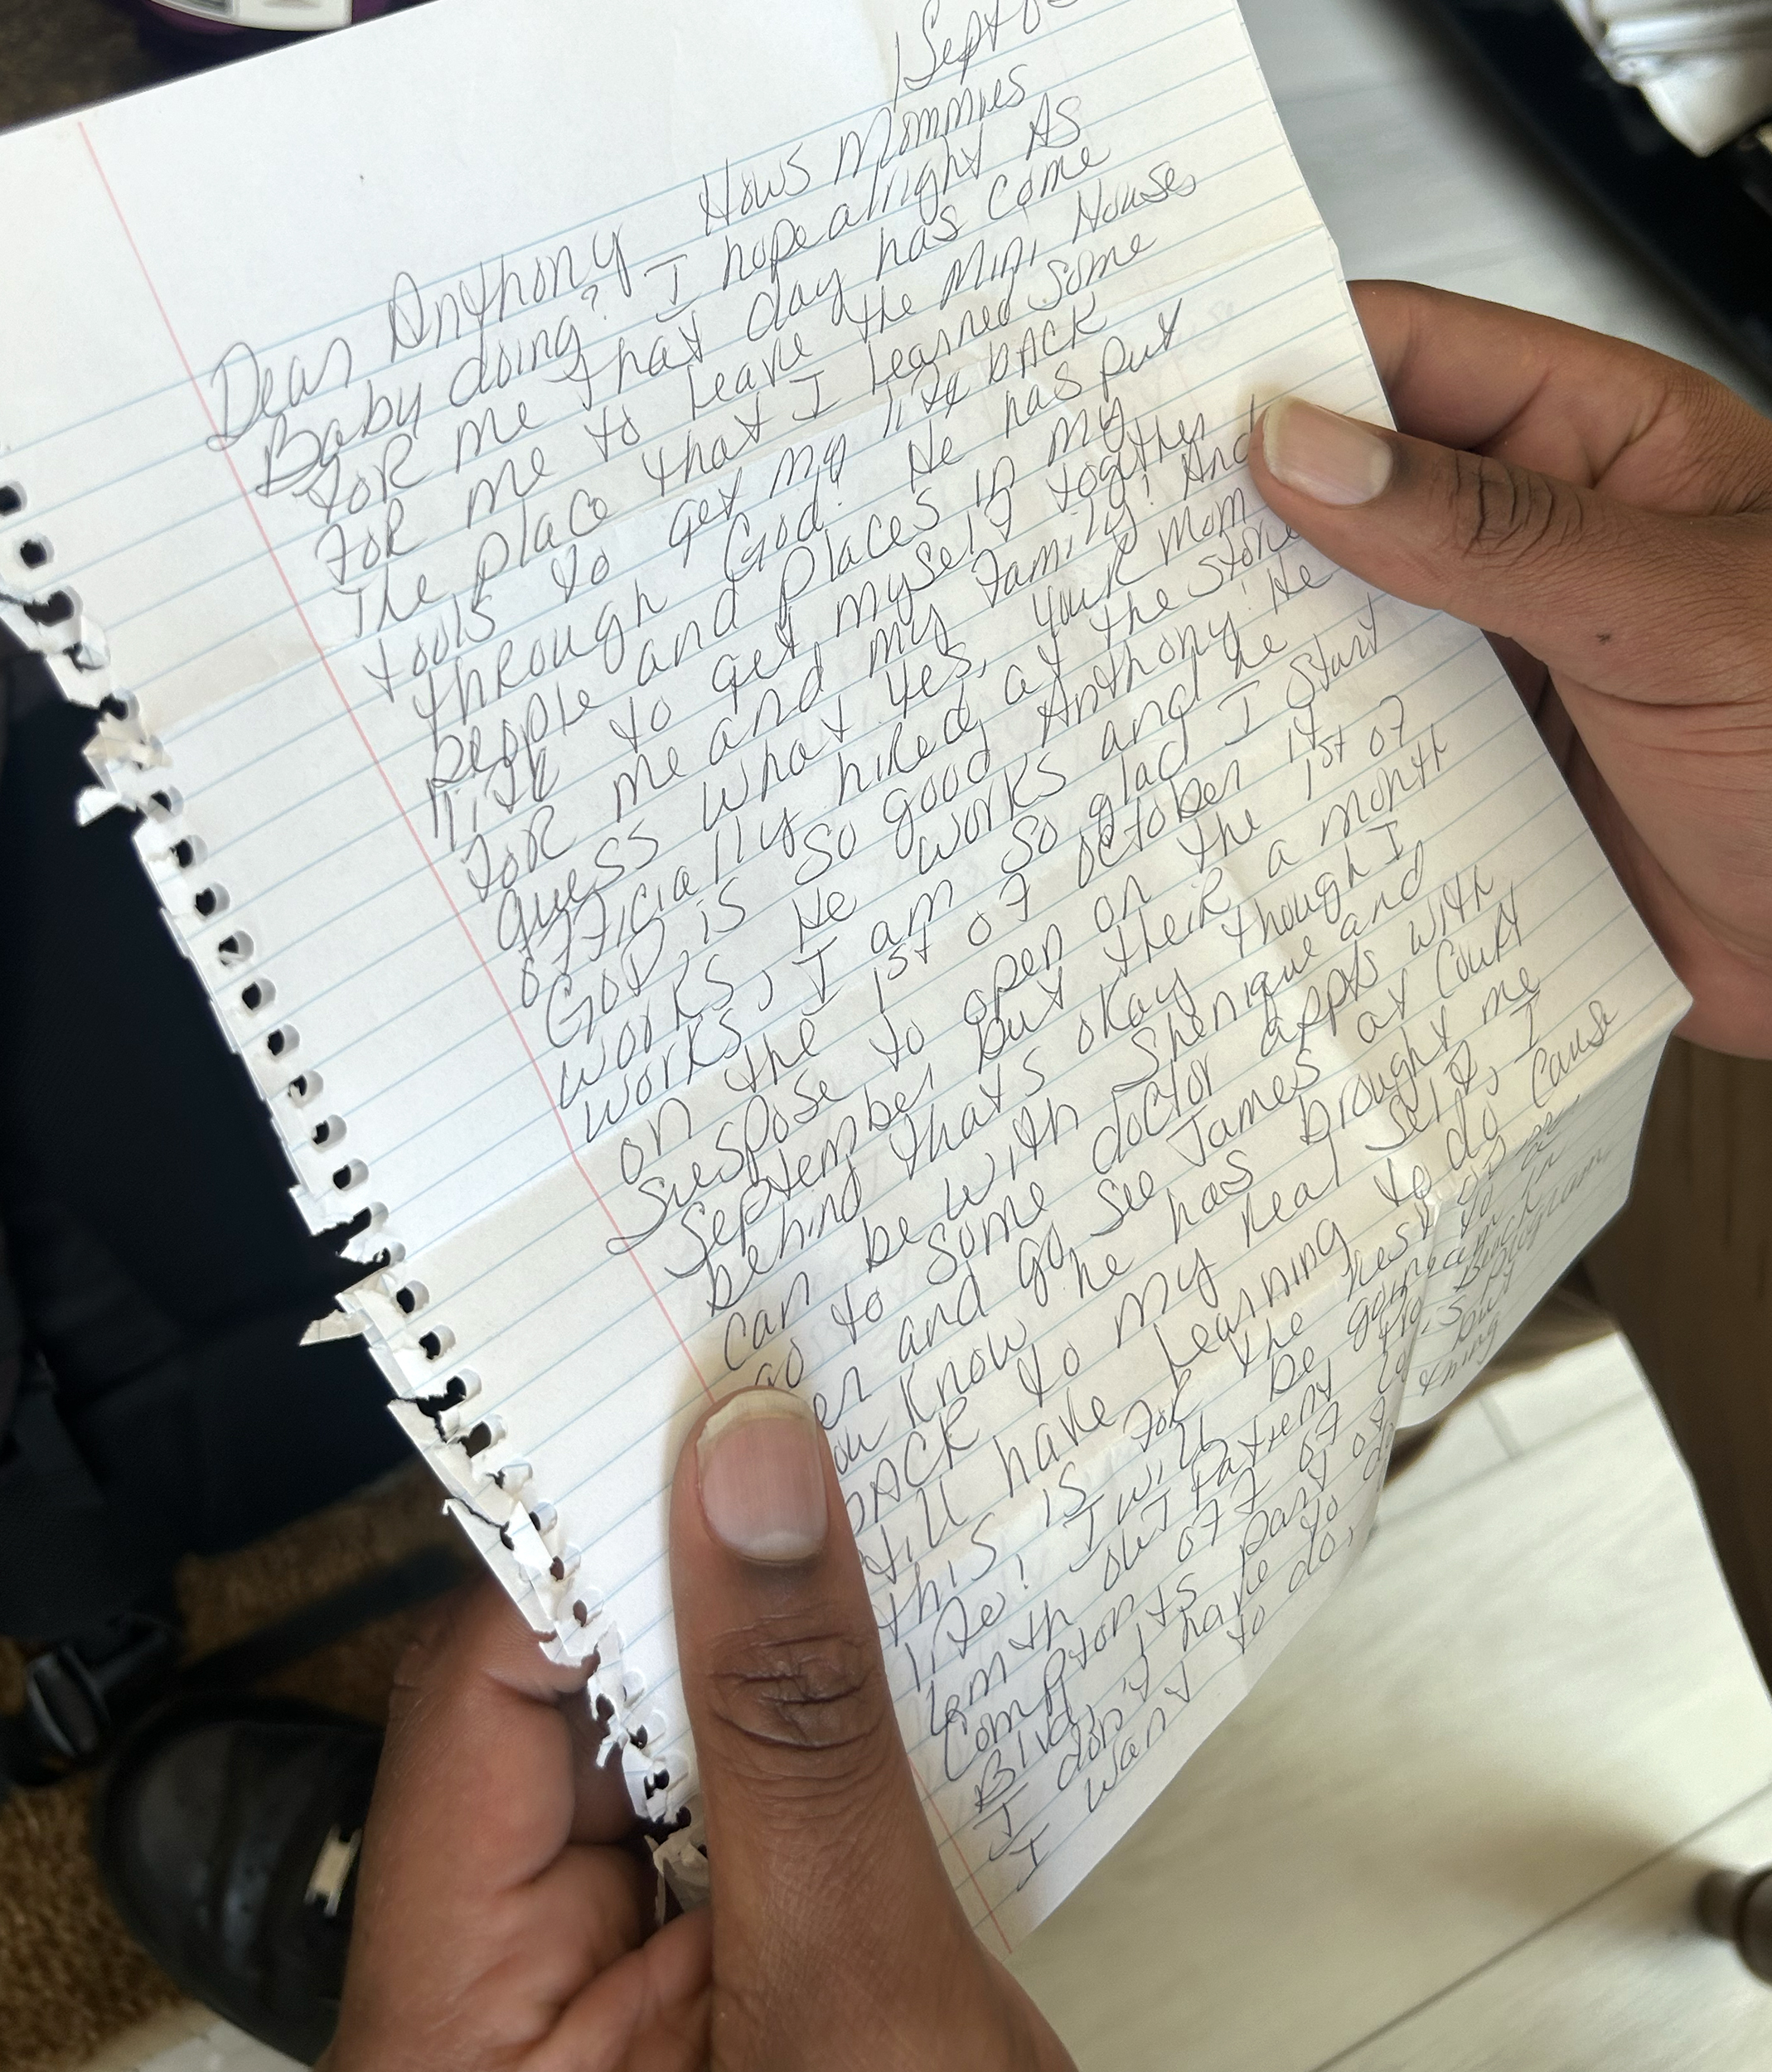 Black man’s hands hold a handwritten letter in pencil on lined notebook paper.